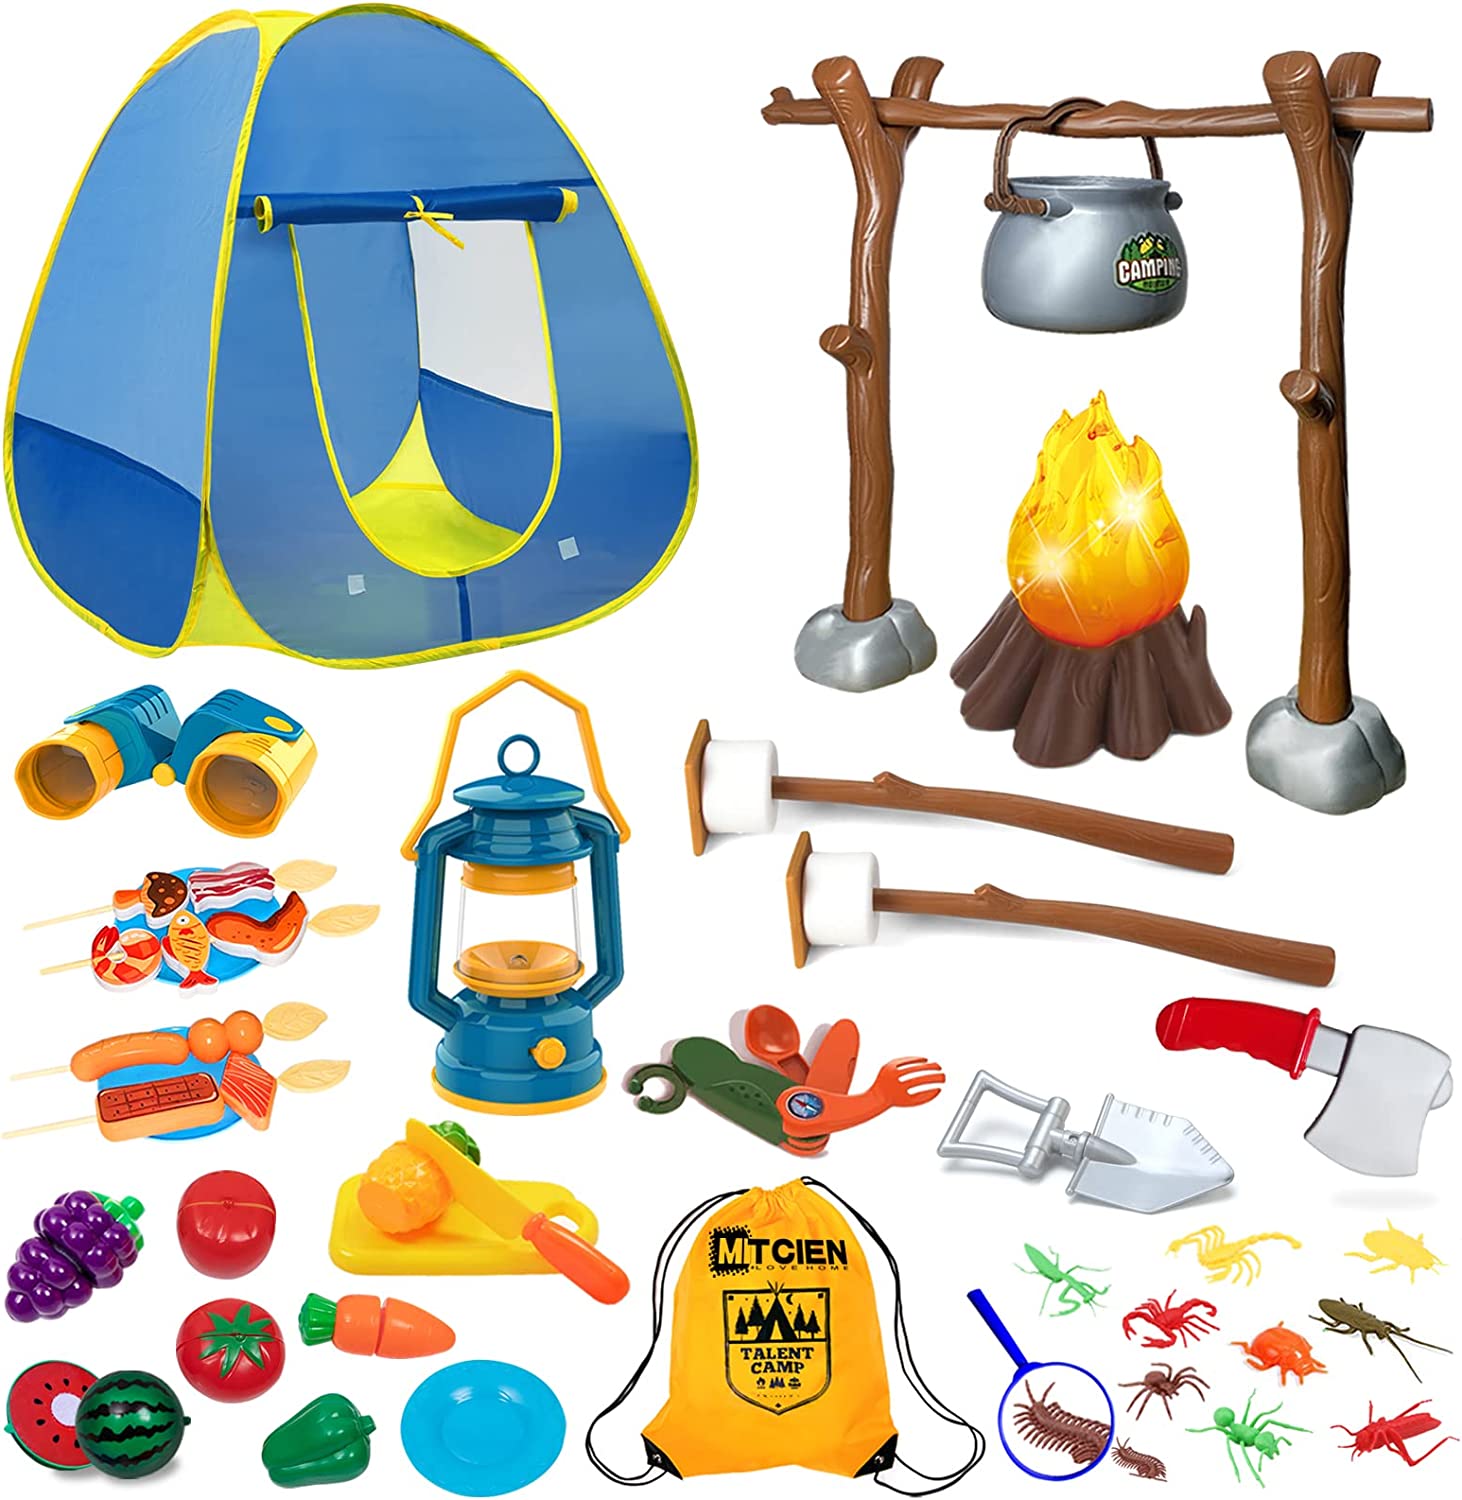 MITCIEN Kids Camping Play Tent with Toy Campfire Marshmallow /Fruits Toys Play Tent Set for Boys Girls Indoor Outdoor Pretend-Play Game 